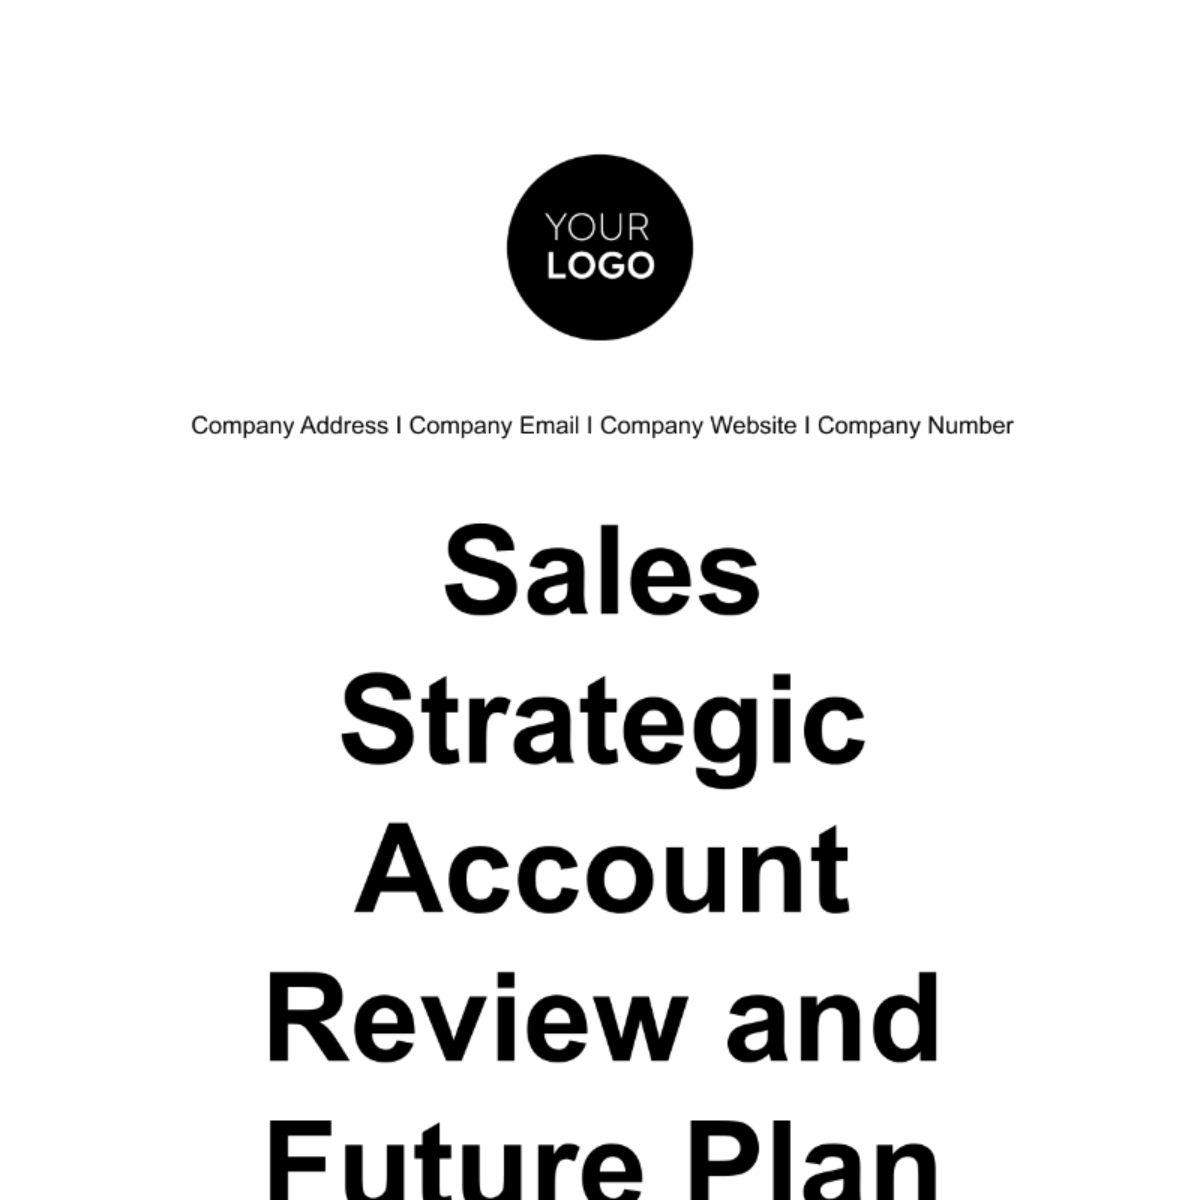 Sales Strategic Account Review and Future Plan Template